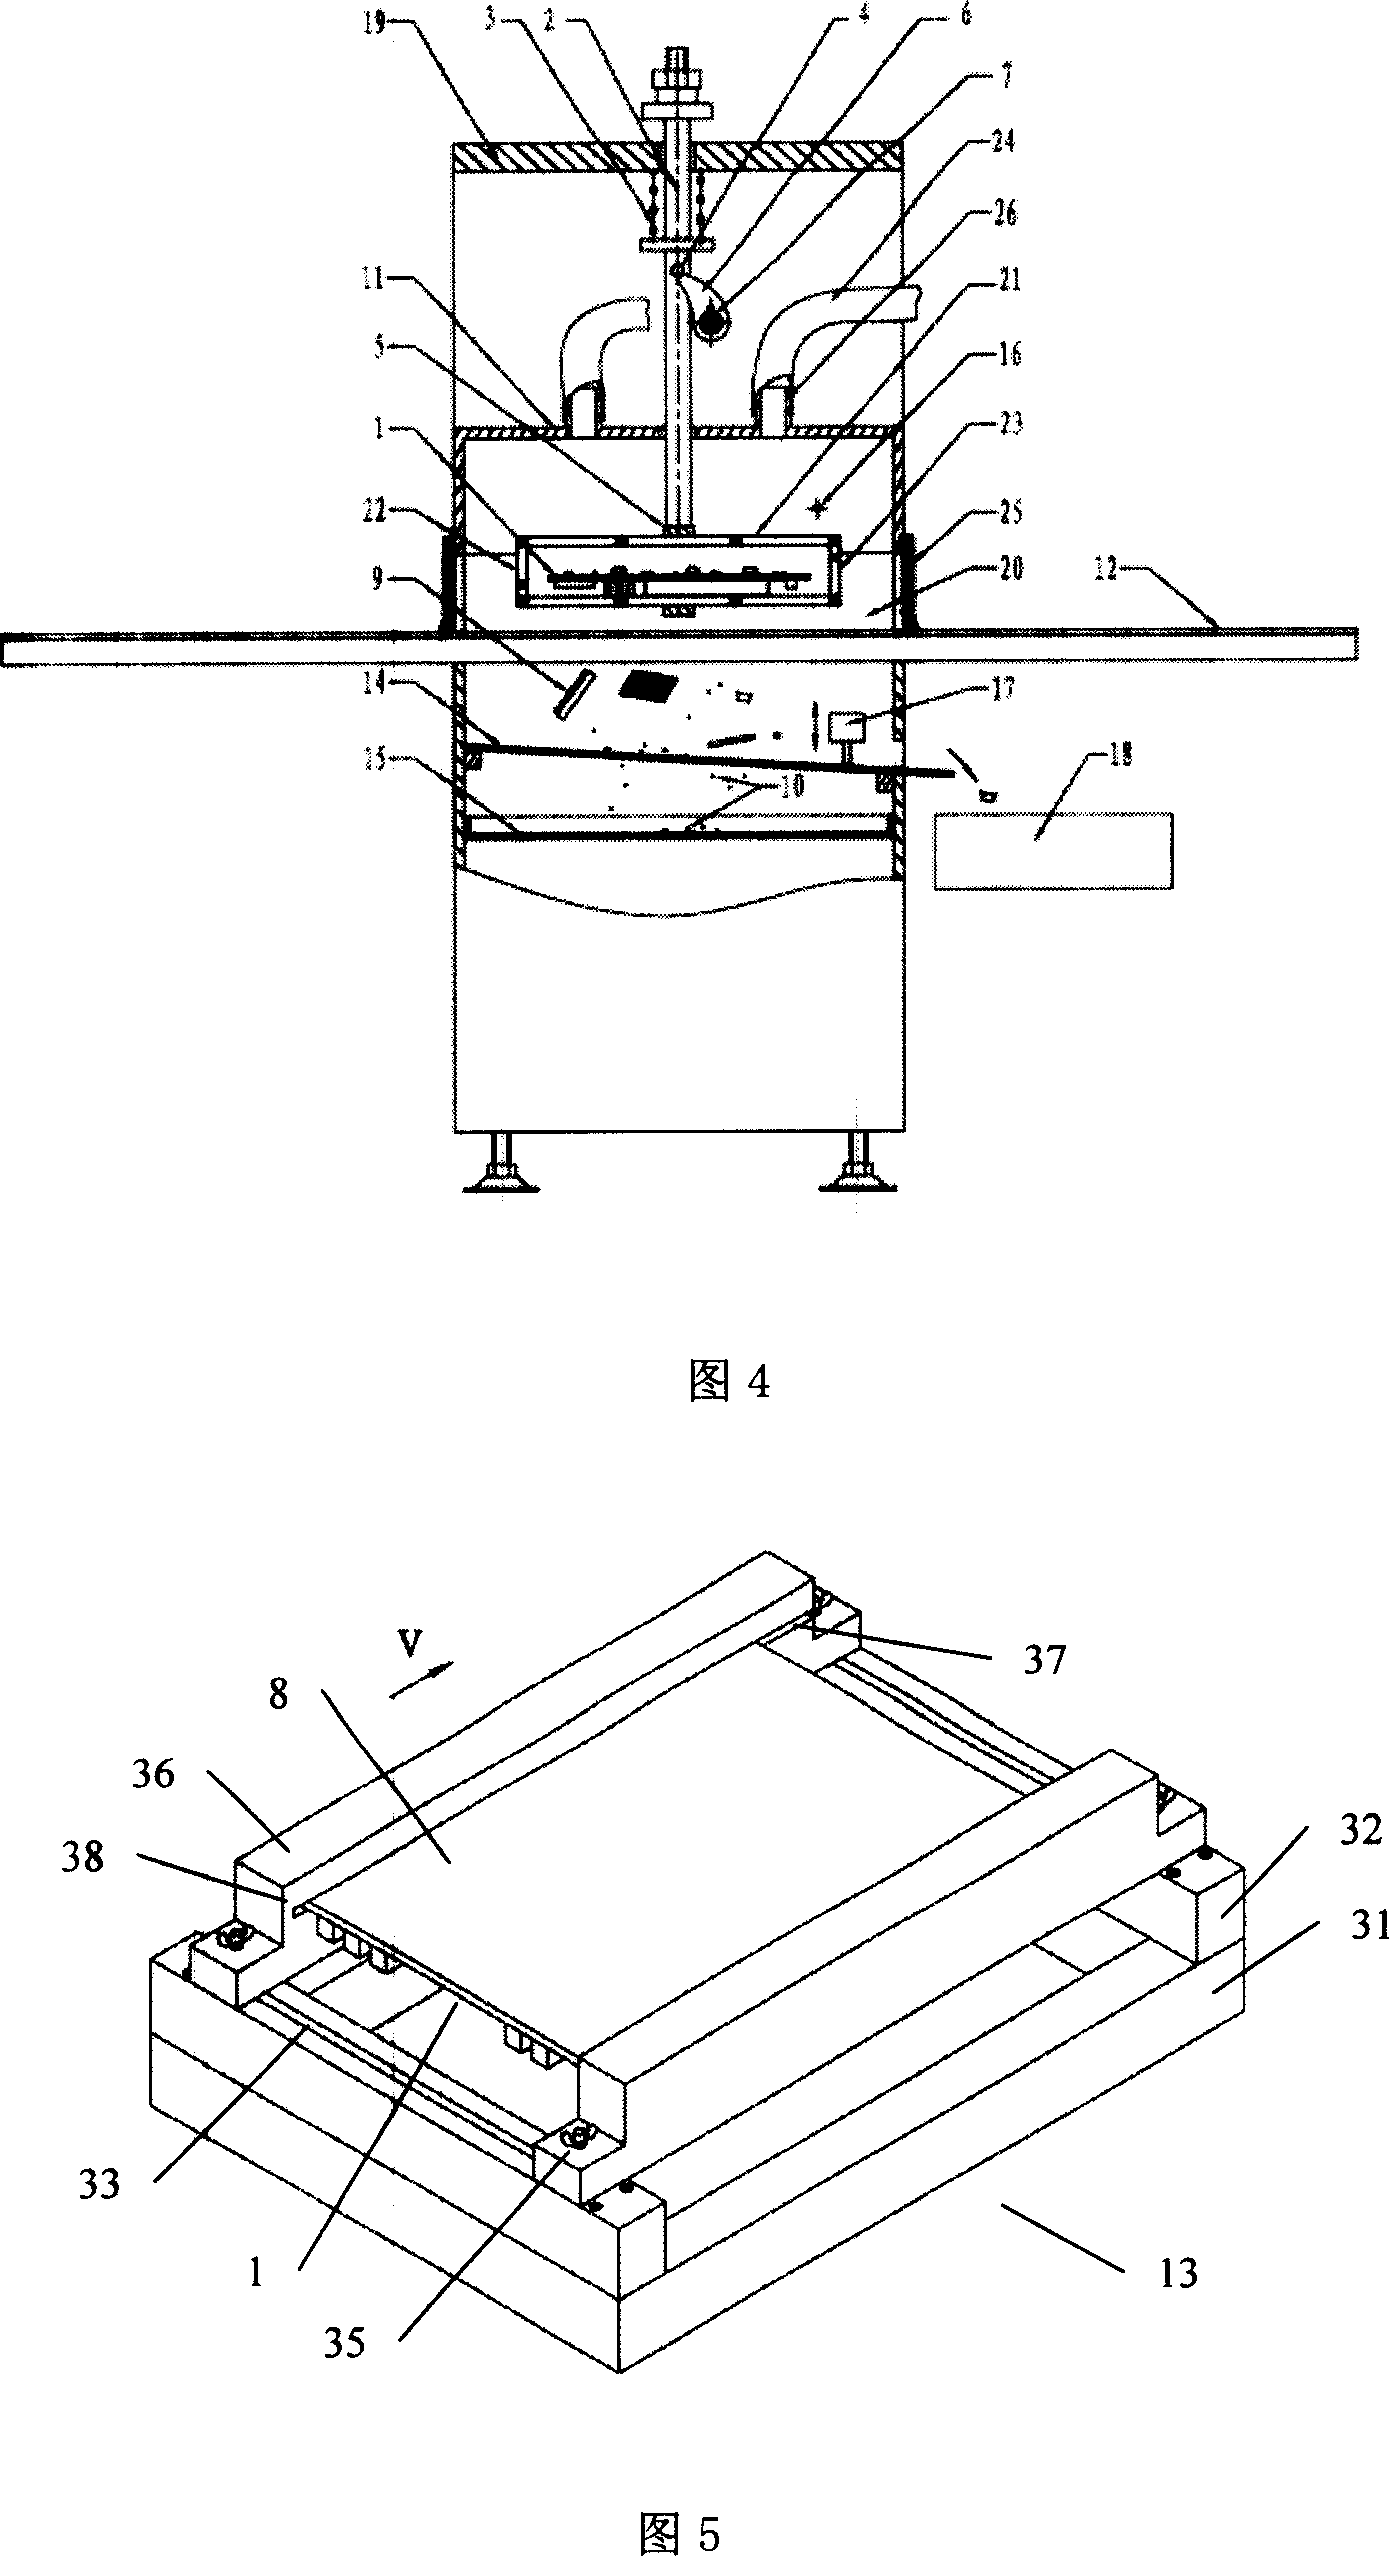 Method and equipment for disassembling components entirely from waste circuit board